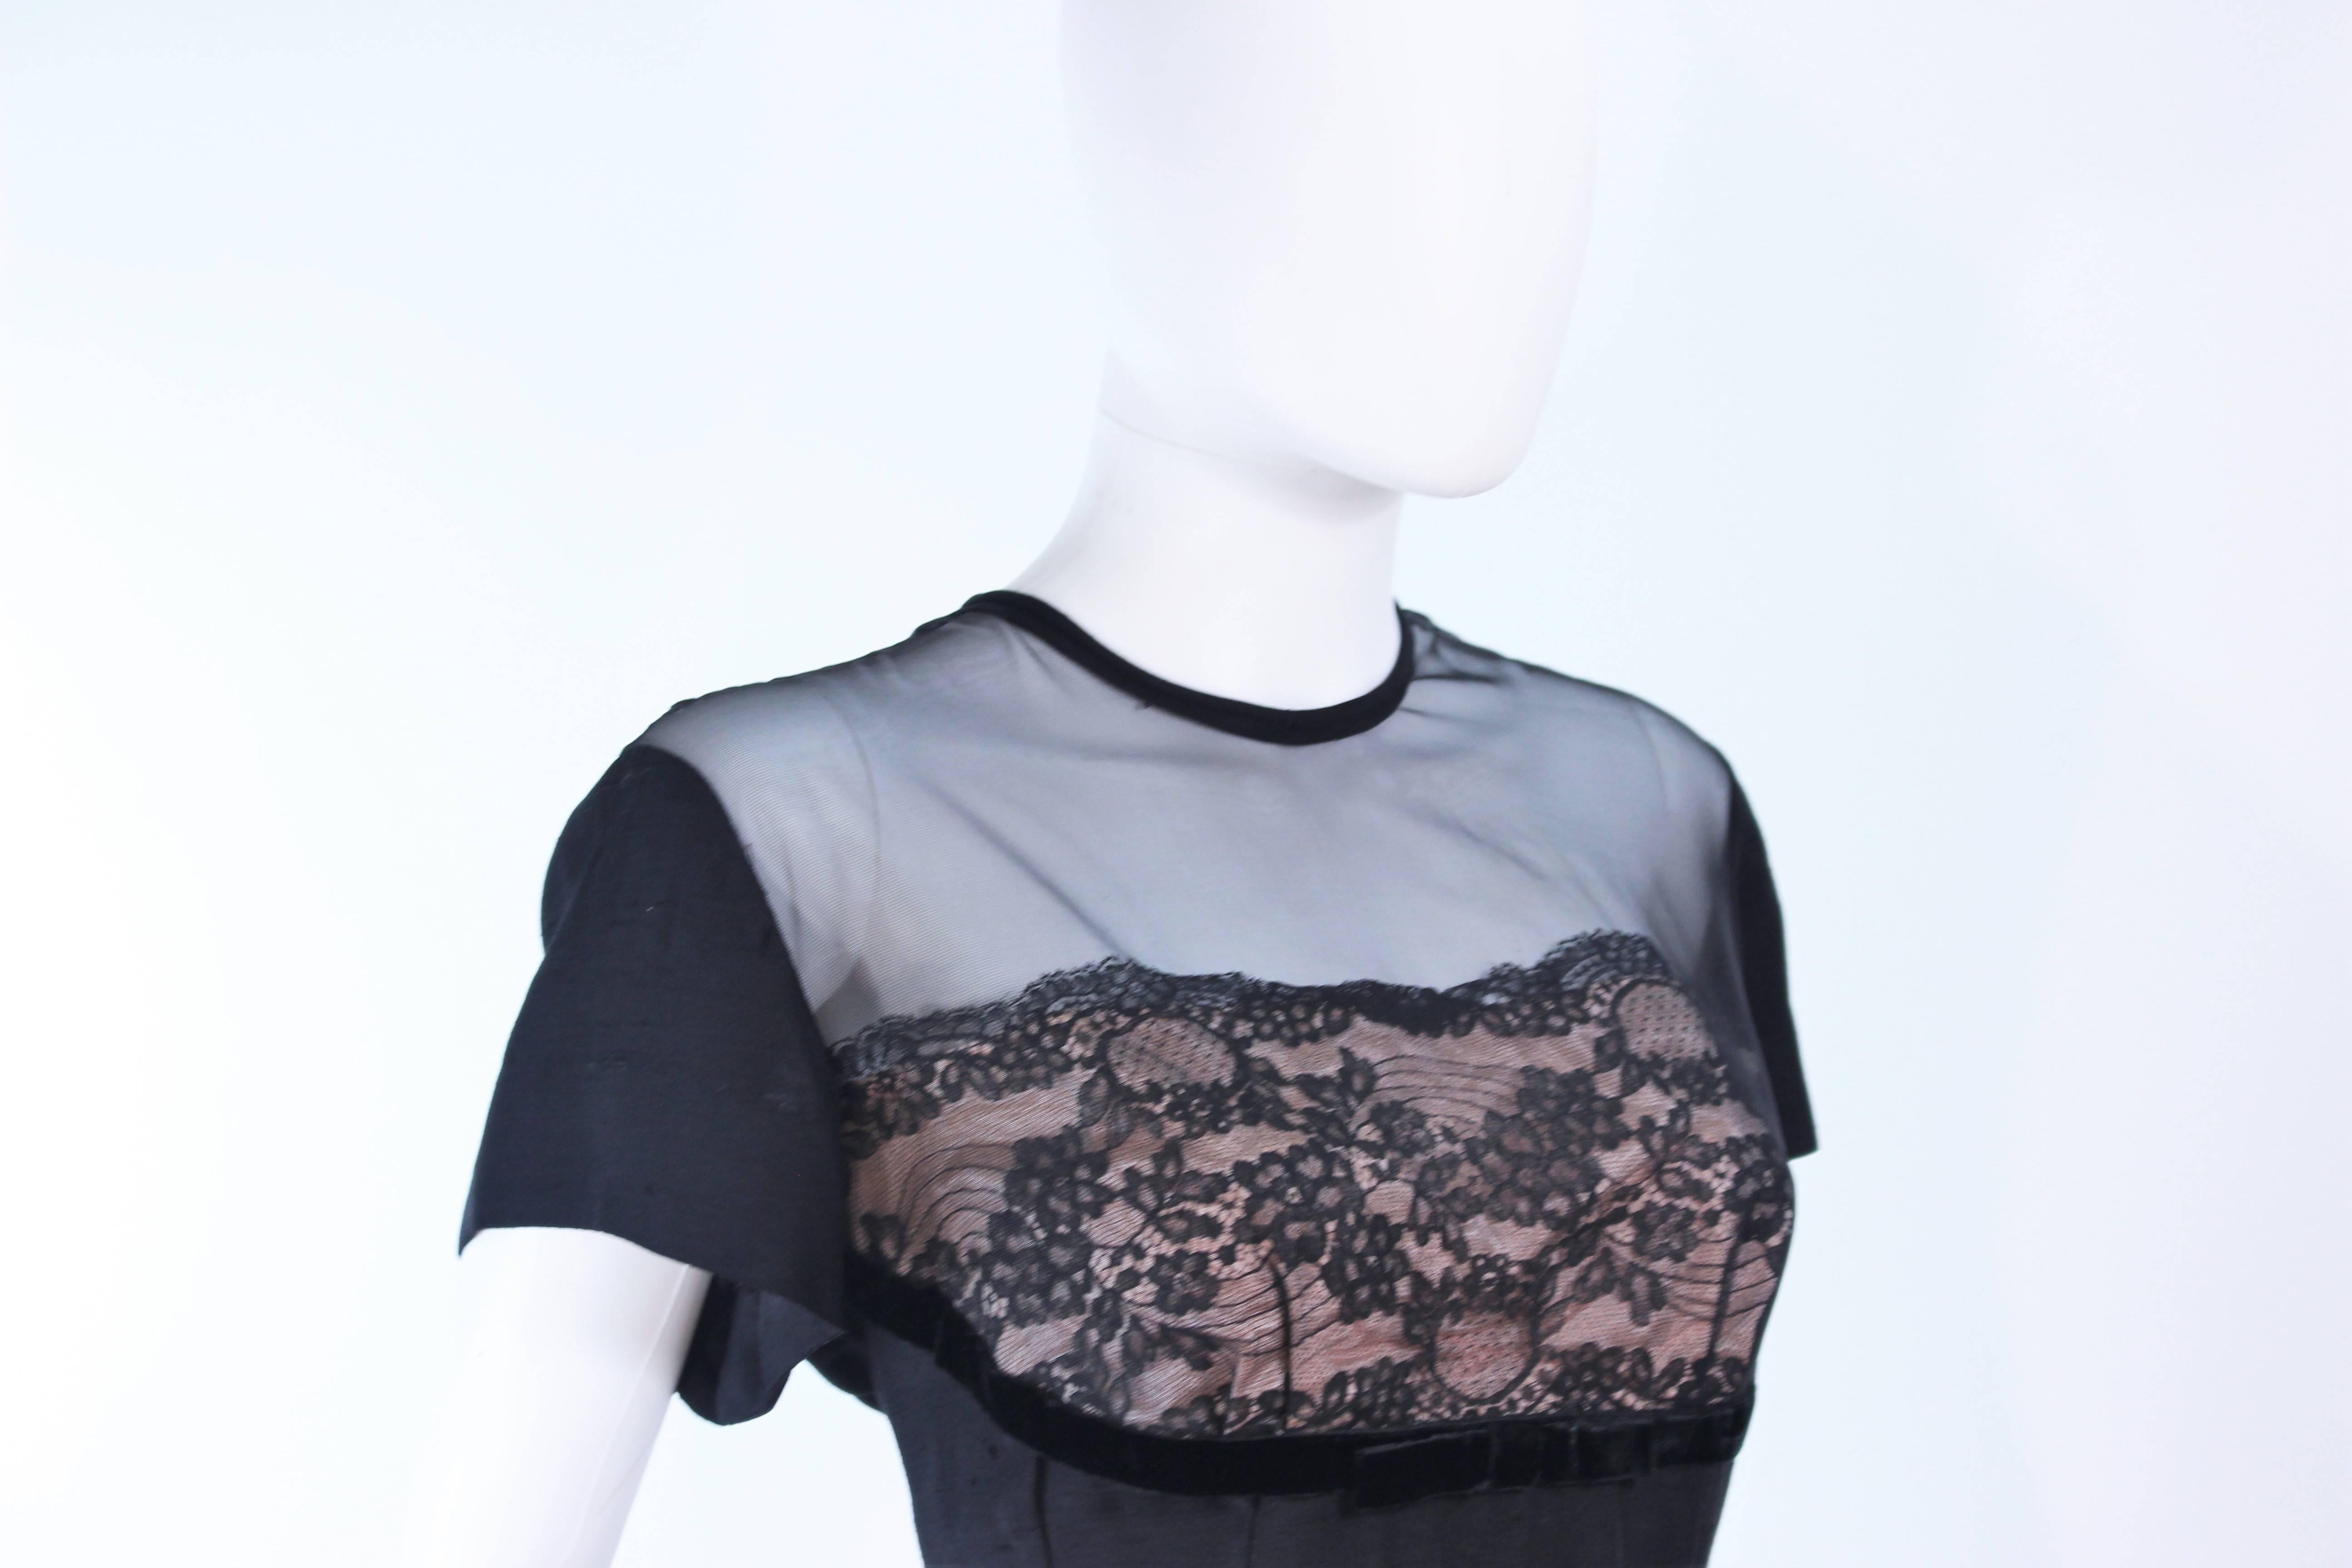 J. HARLAN Black Silk and Lace Cocktail Dress with Sheer Details Size 8 For Sale 3